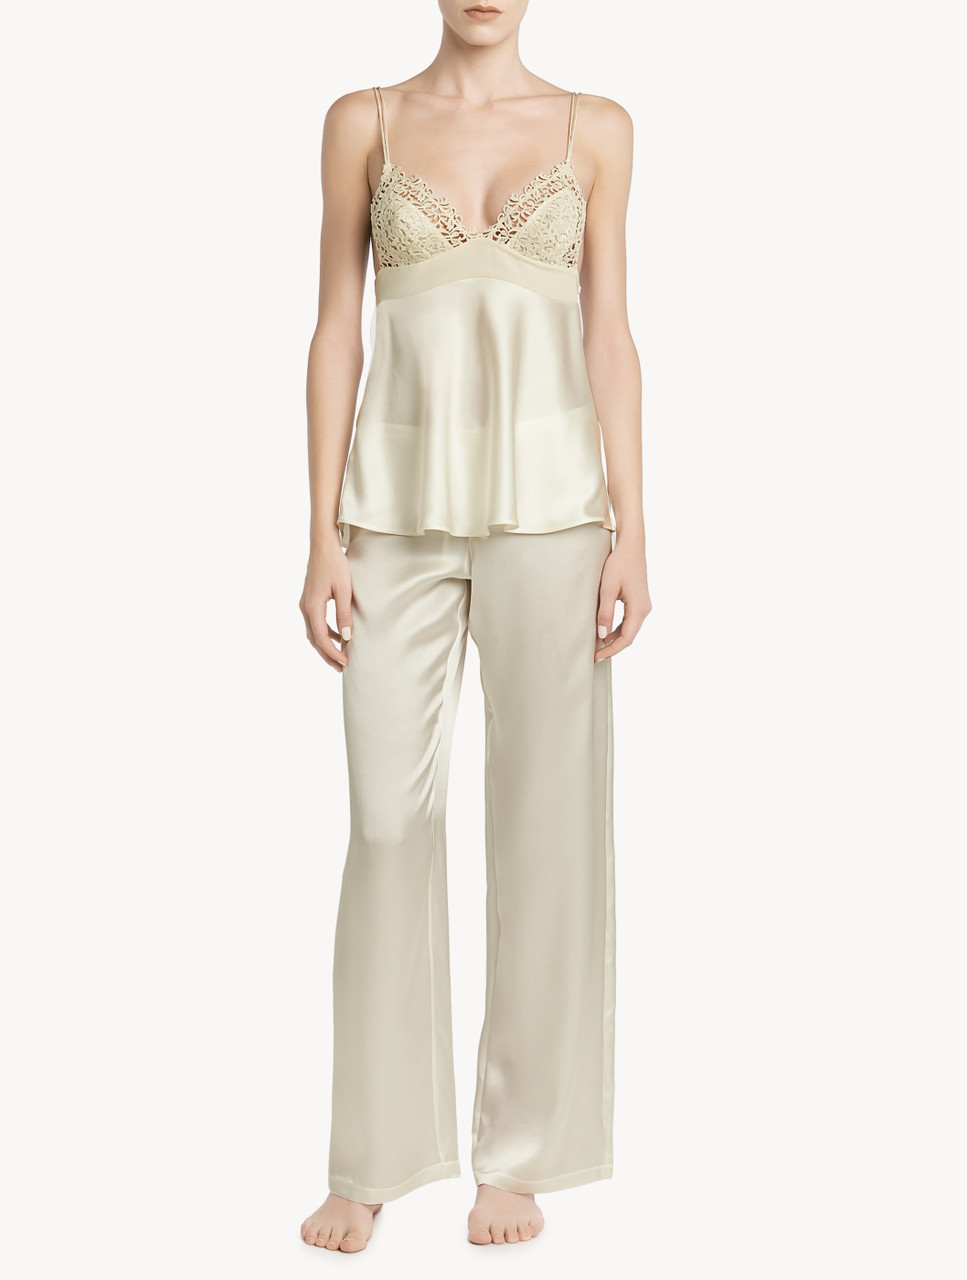 Off-white silk camisole with macramé